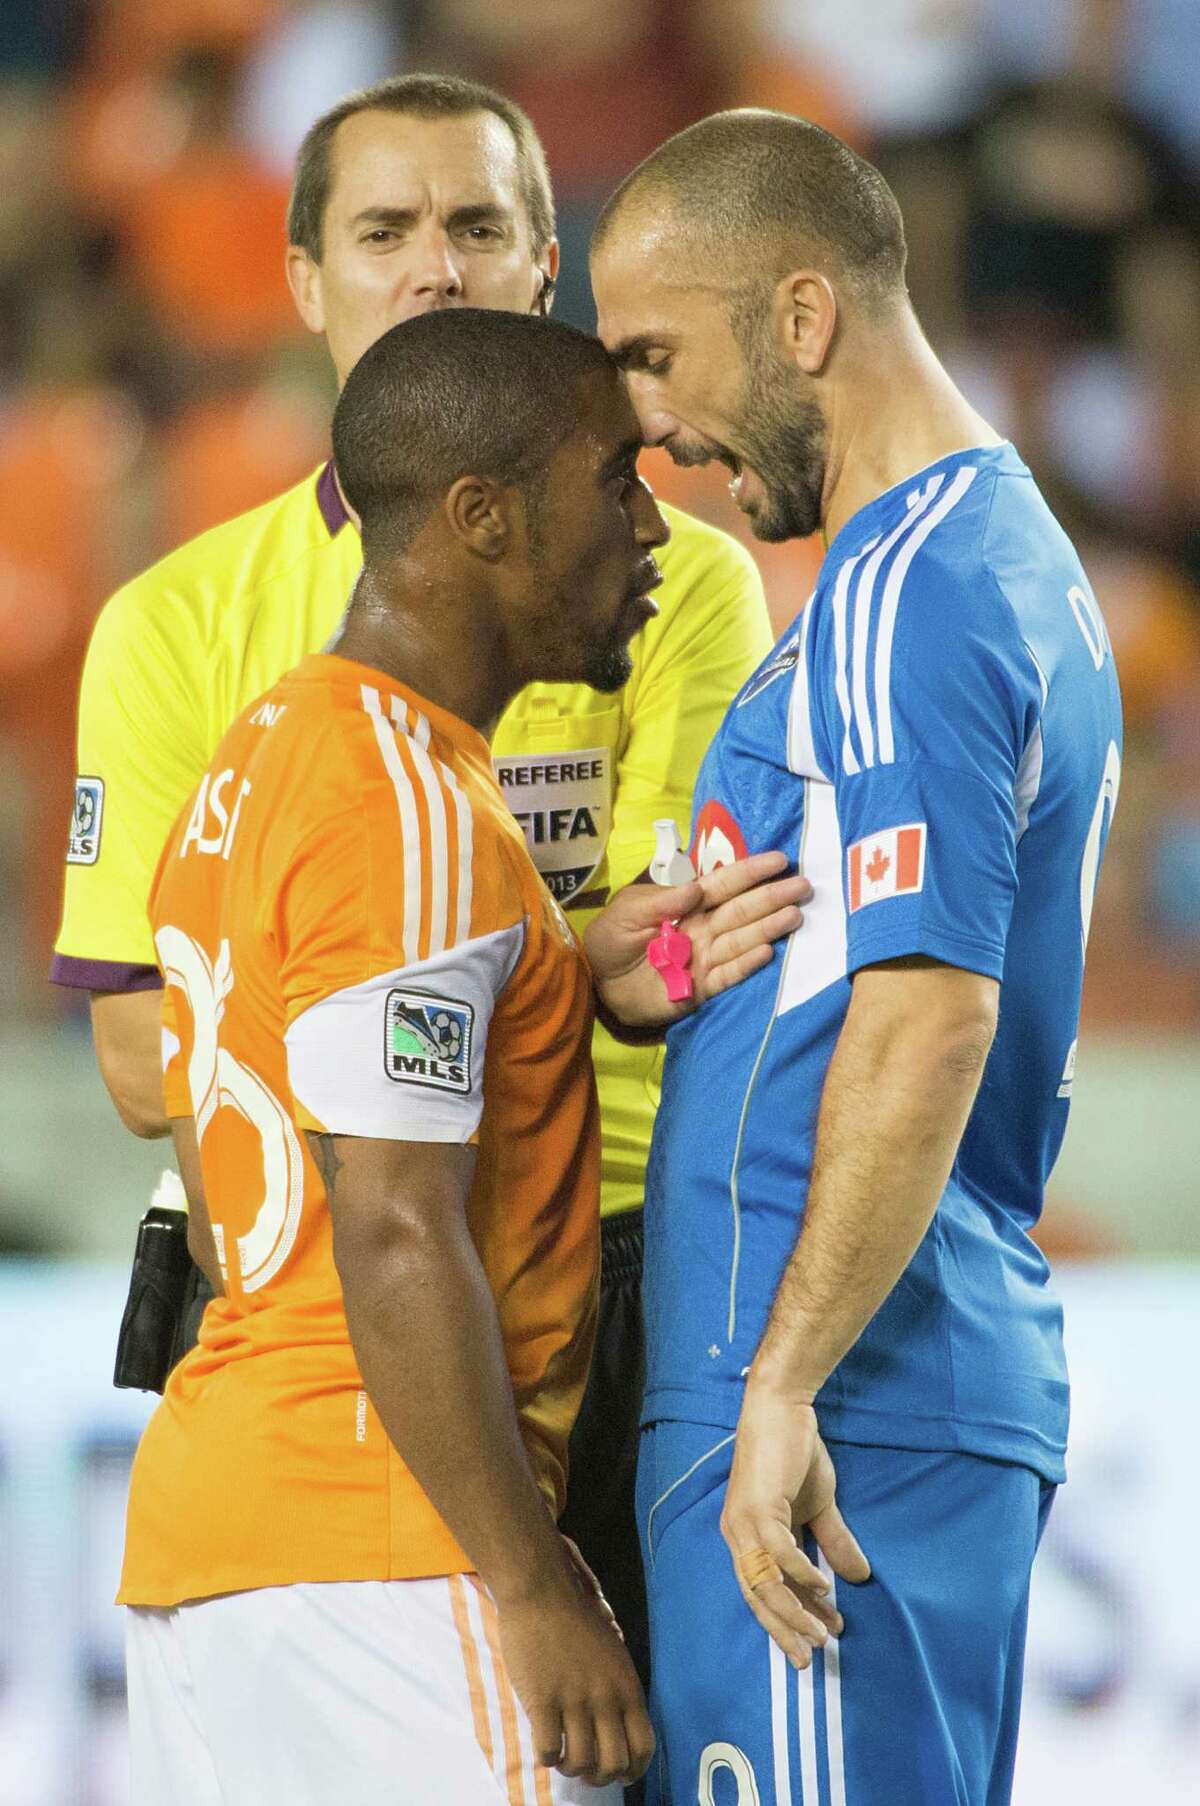 "He's a bit chippy," says Dynamo teammate Bobby Boswell of midfielder Corey Ashe, left, and it's safe say to that Montreal forward Marco Di Vaio, right, would agree.